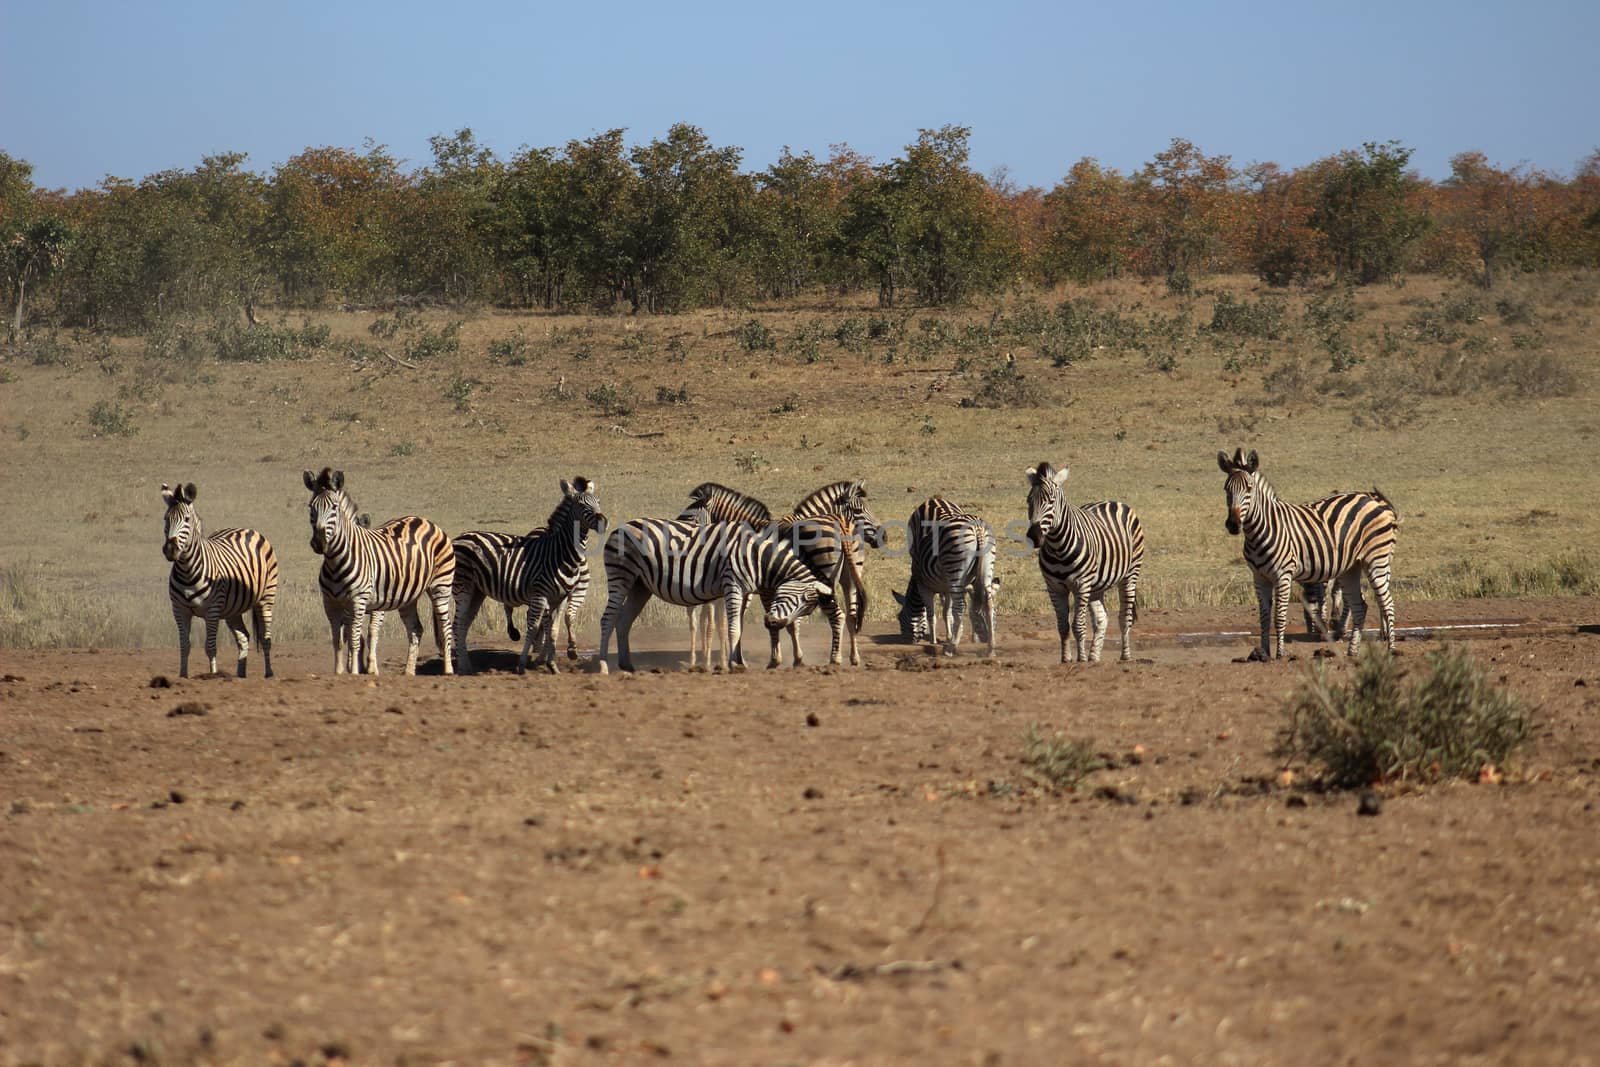 Plains zebra herd drinkink water from a water hole in krugernational park